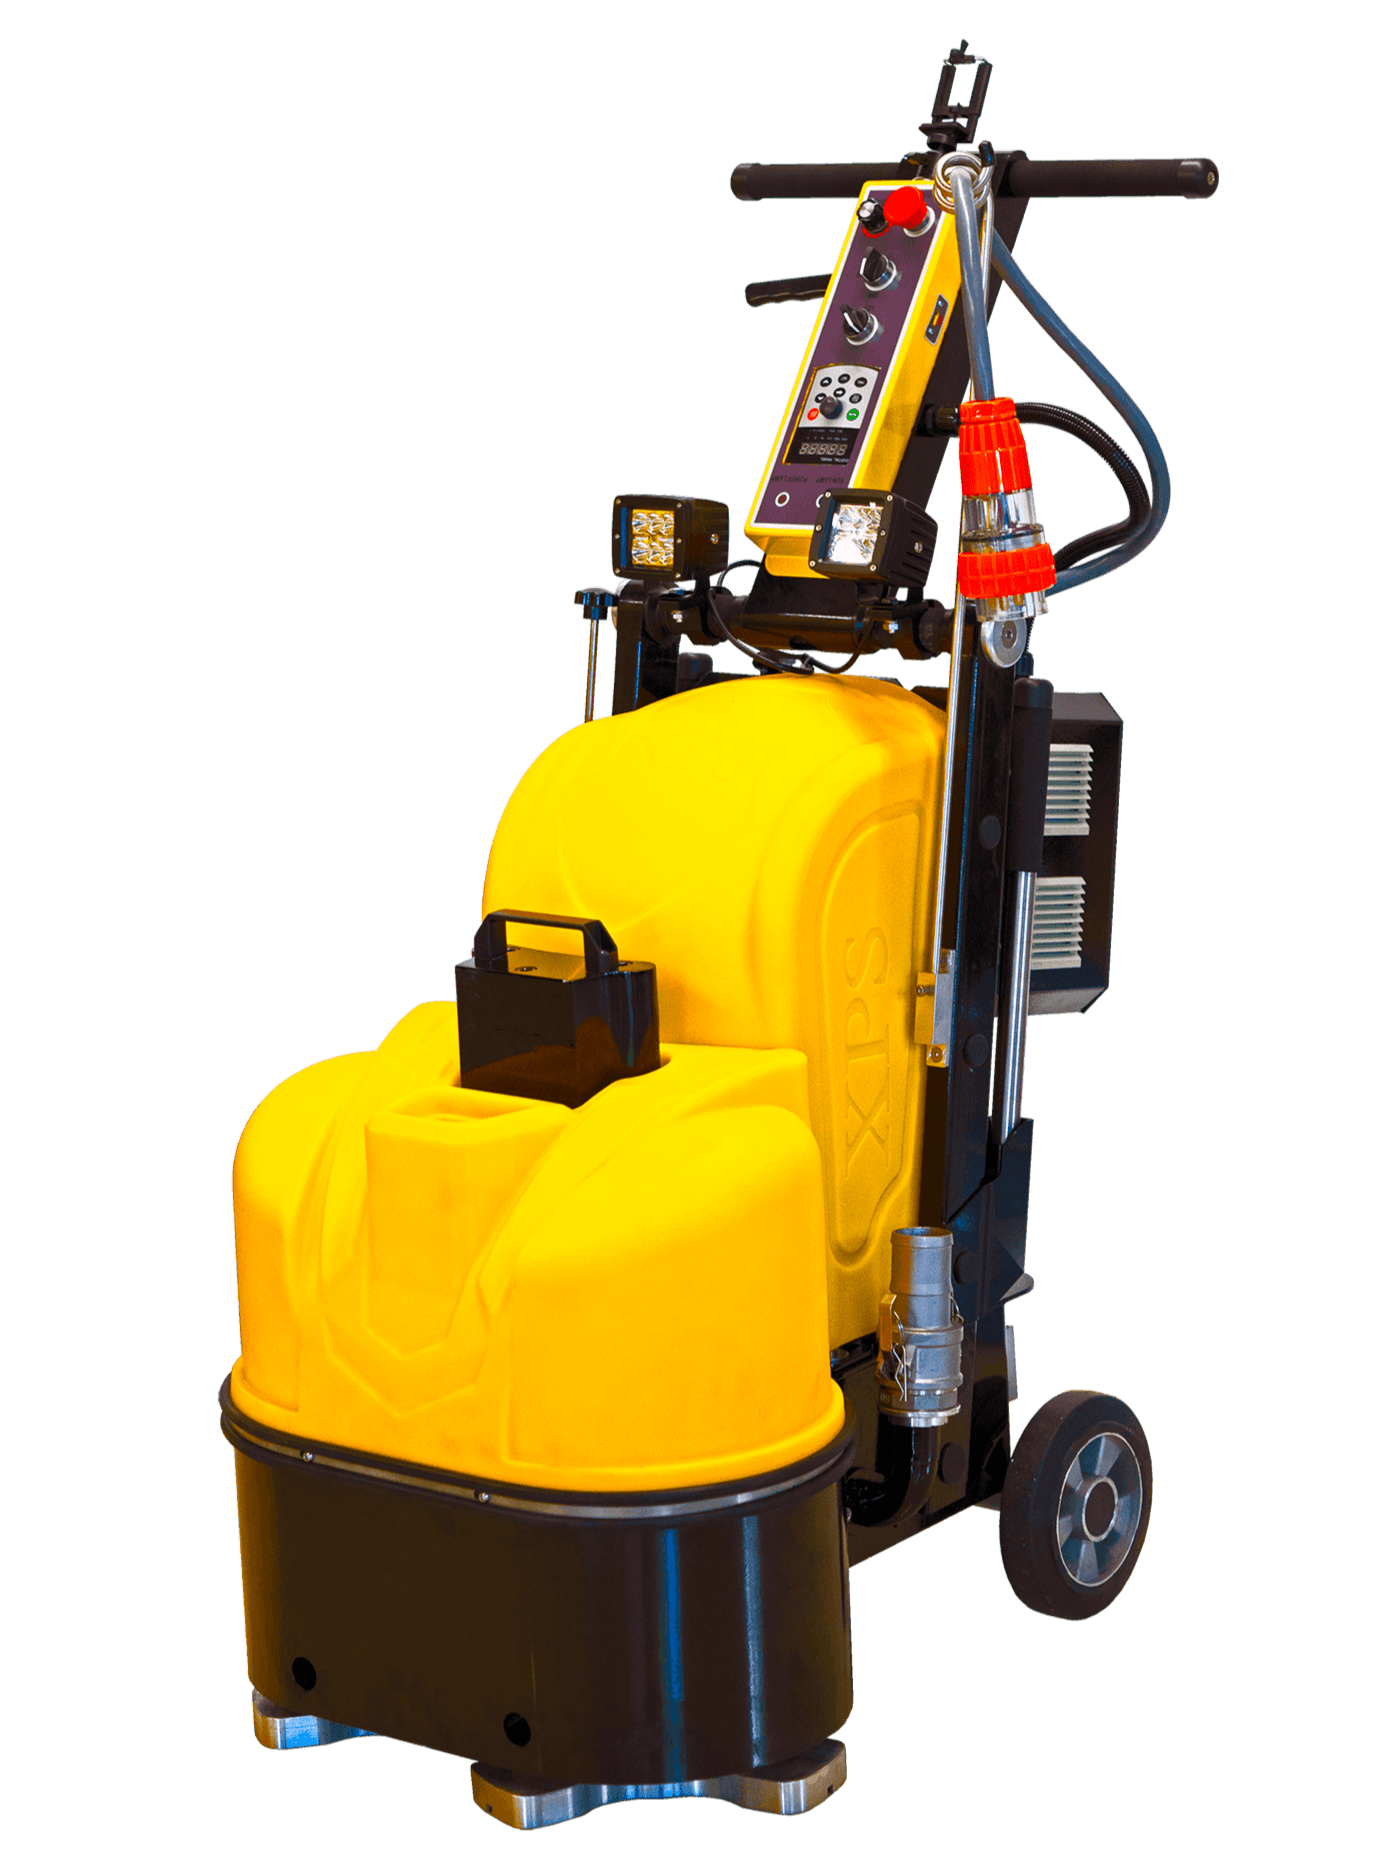 GENIE X550 CONCRETE FLOOR GRINDER - Xtreme Polishing Systems, concrete grinders and polishers, cement grinders, concrete floor grinding, diamond grinder concrete, concrete polisher